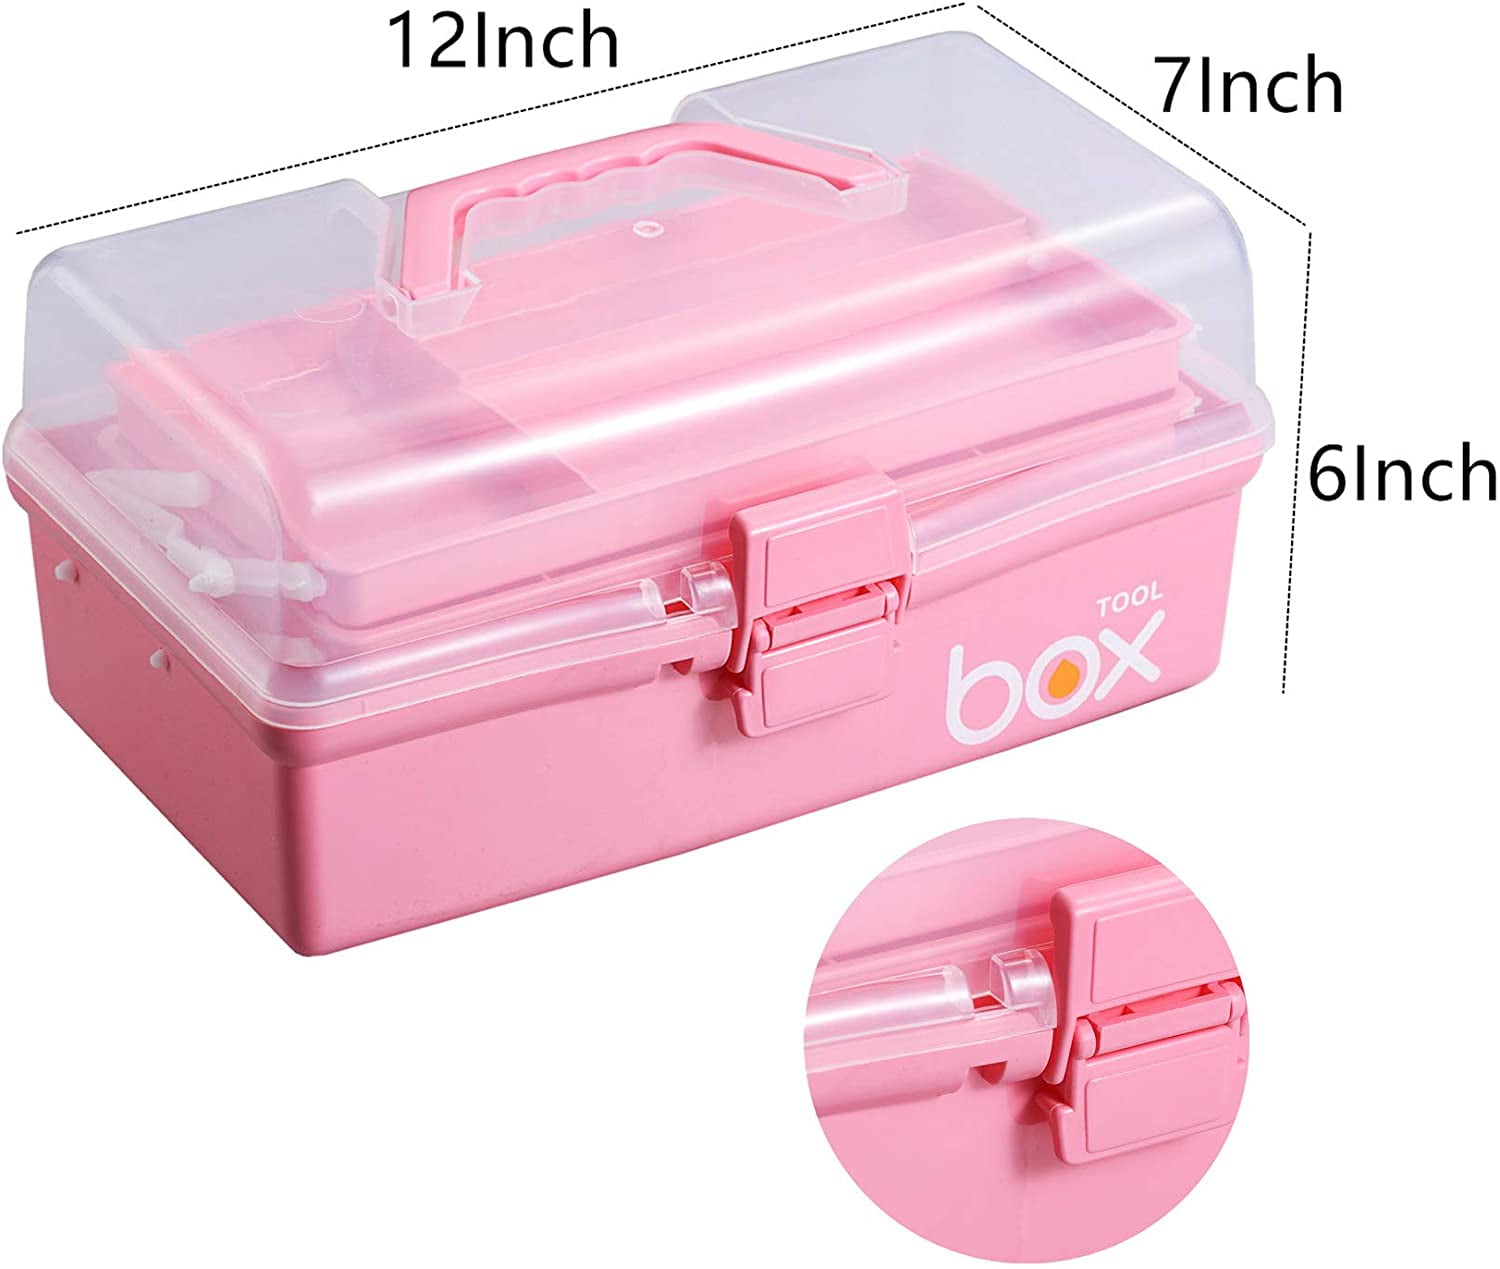  VOAUCEAN 12'' Three-Layer Folding Storage Box, Art Crafts  Case,Organization Portable Handled Tool Box for Sewing,Makeup,Tackle,Medical  Supply Organizer (Pink)